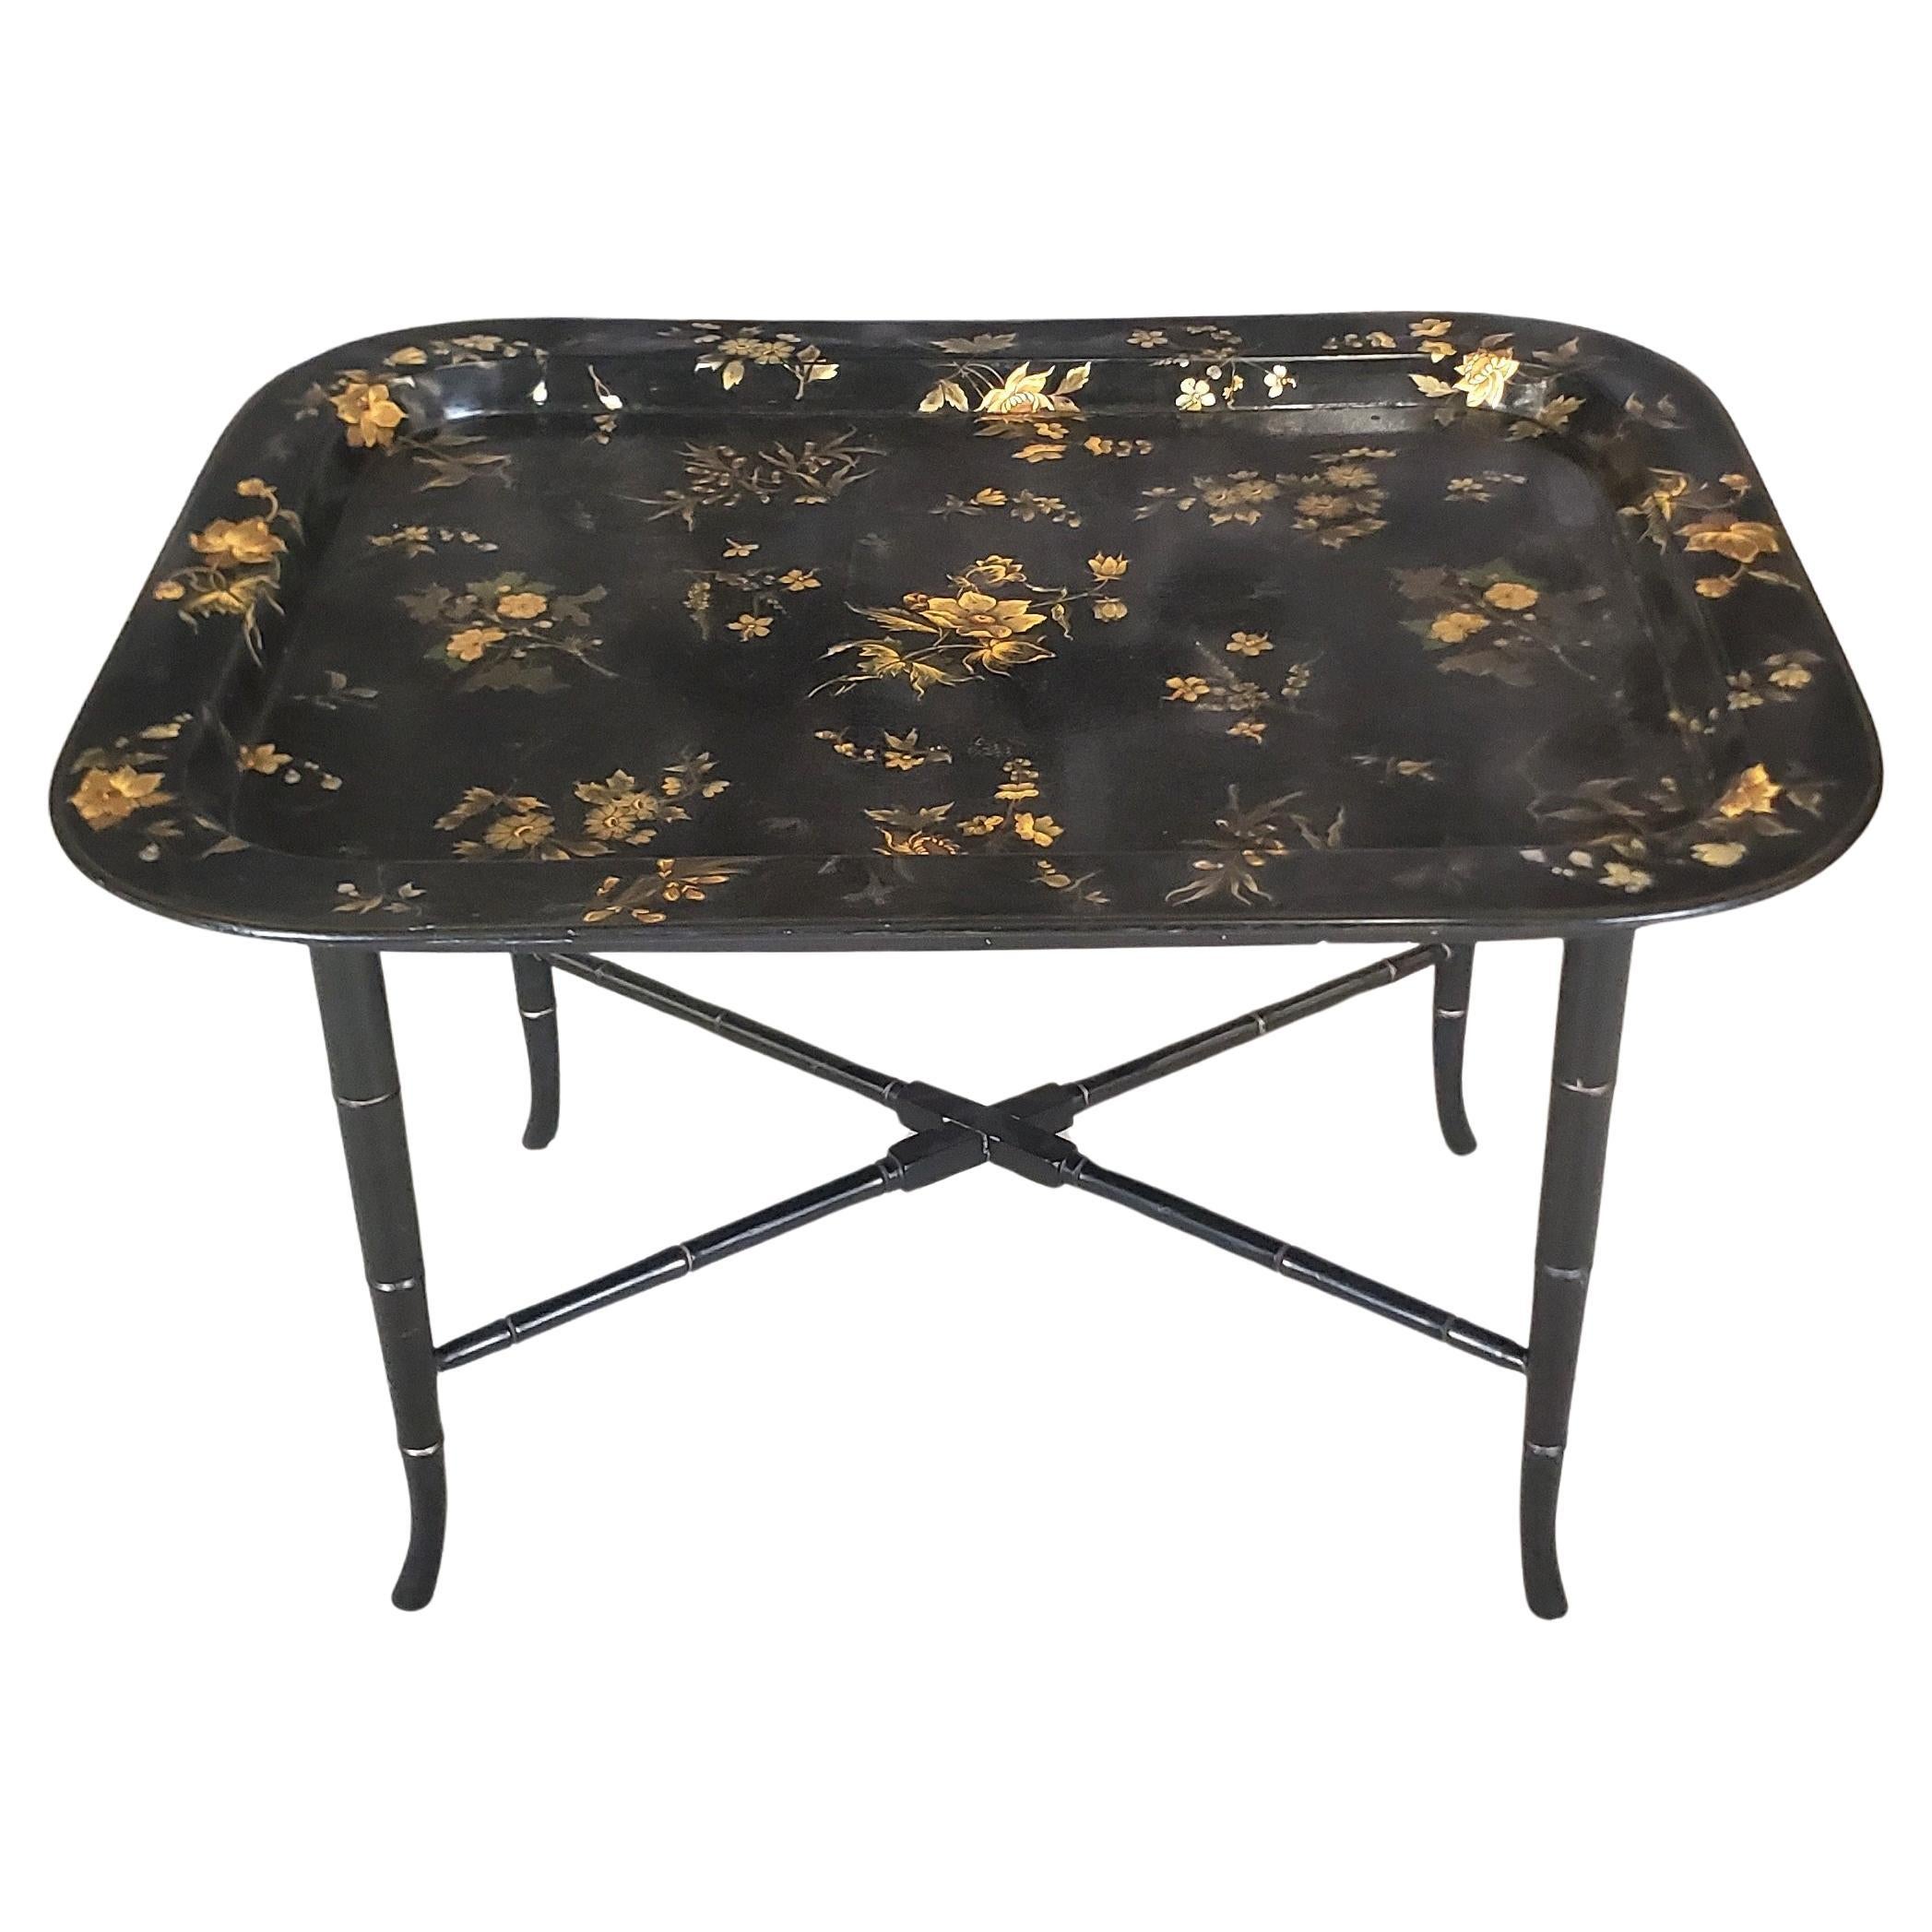 Antique English Paper Mache Tray Table with Faux Bamboo Legs & Floral Decoration For Sale